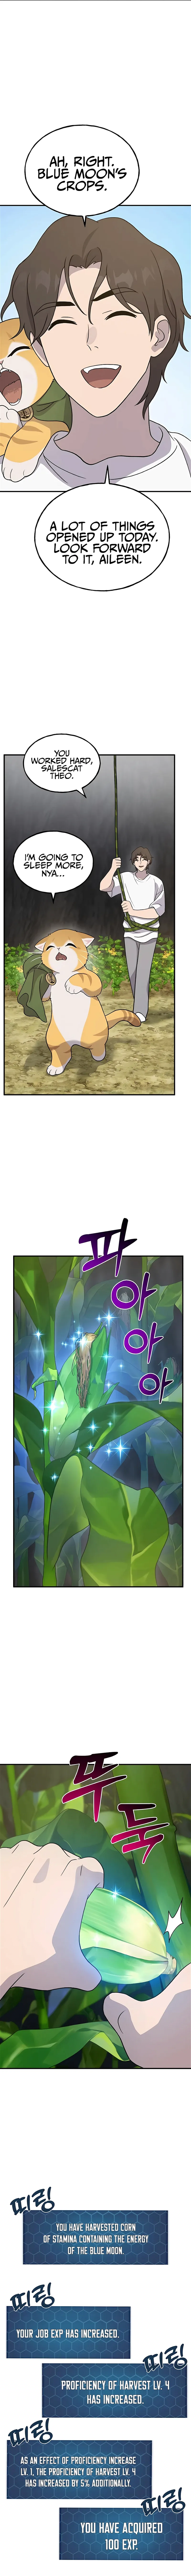 Solo Farming In The Tower Chapter 31 page 16